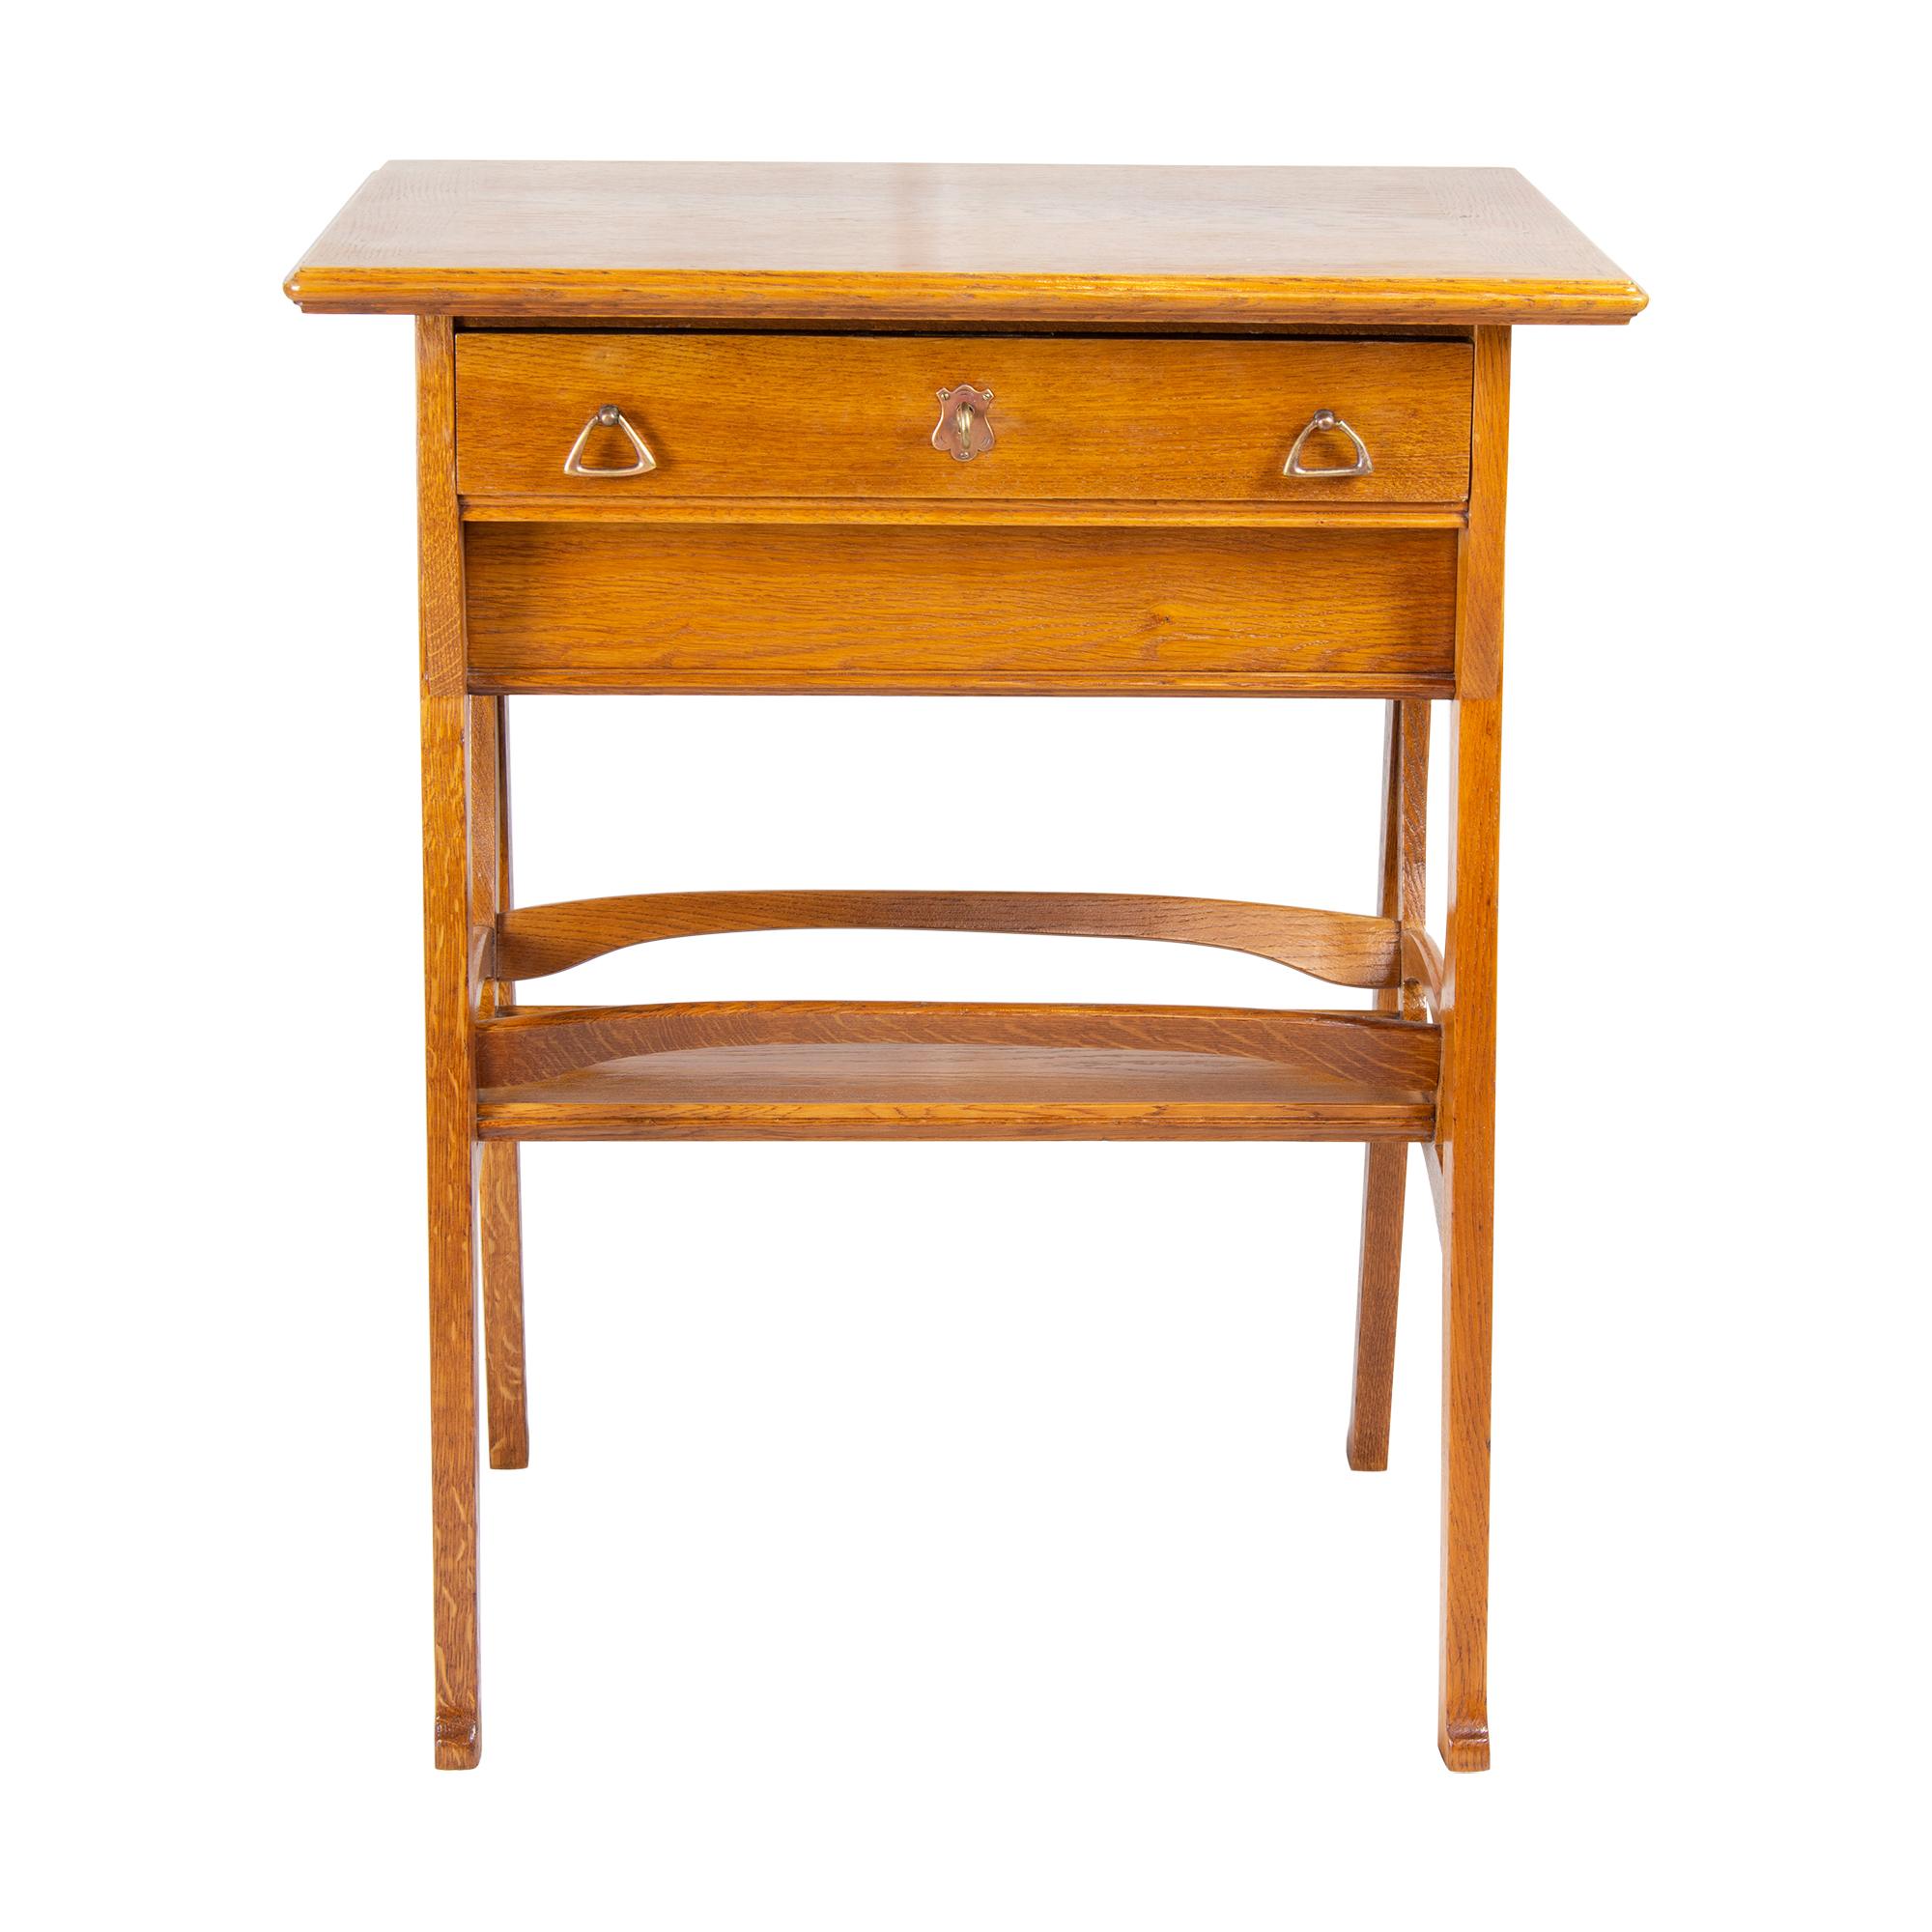 Beautiful sewing or side table made of oak wood. The table dates back to the time of Art Nouveau period, more specifically from the time, around 1905. The table has a very nice art nouveau design. The bottom drawer can be opened in both directions.